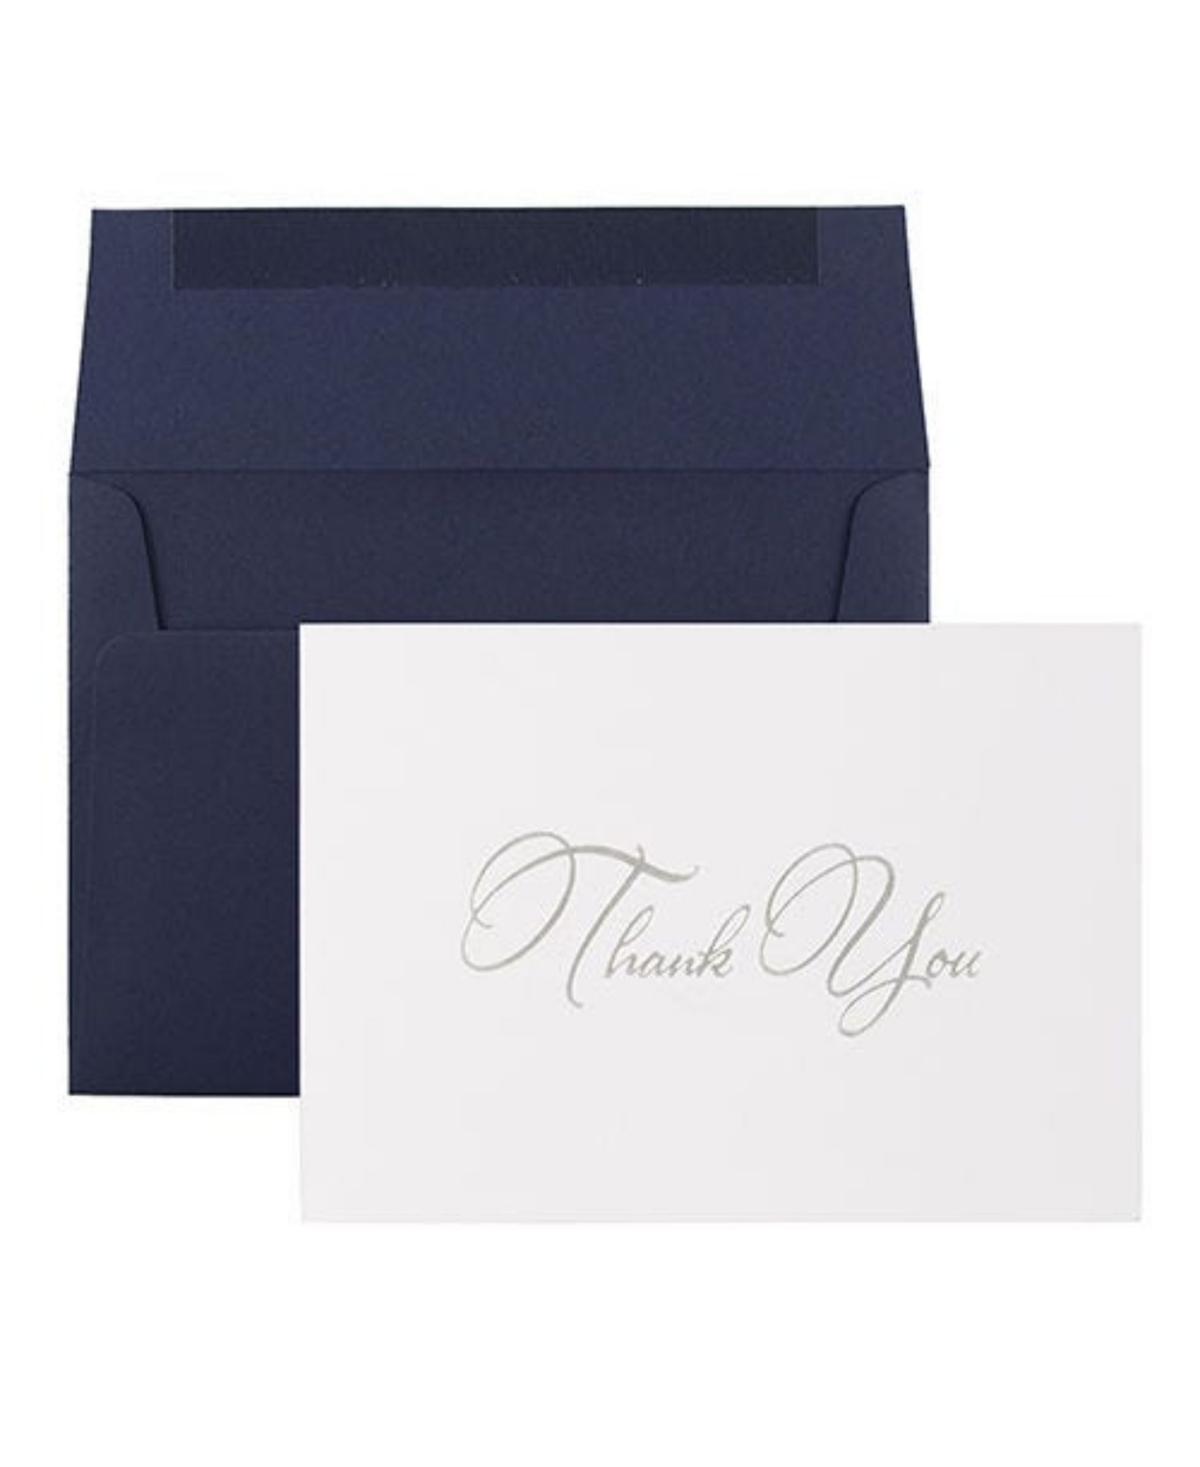 Jam Paper Thank You Card Sets In Silver Script Cards Navy Envelopes